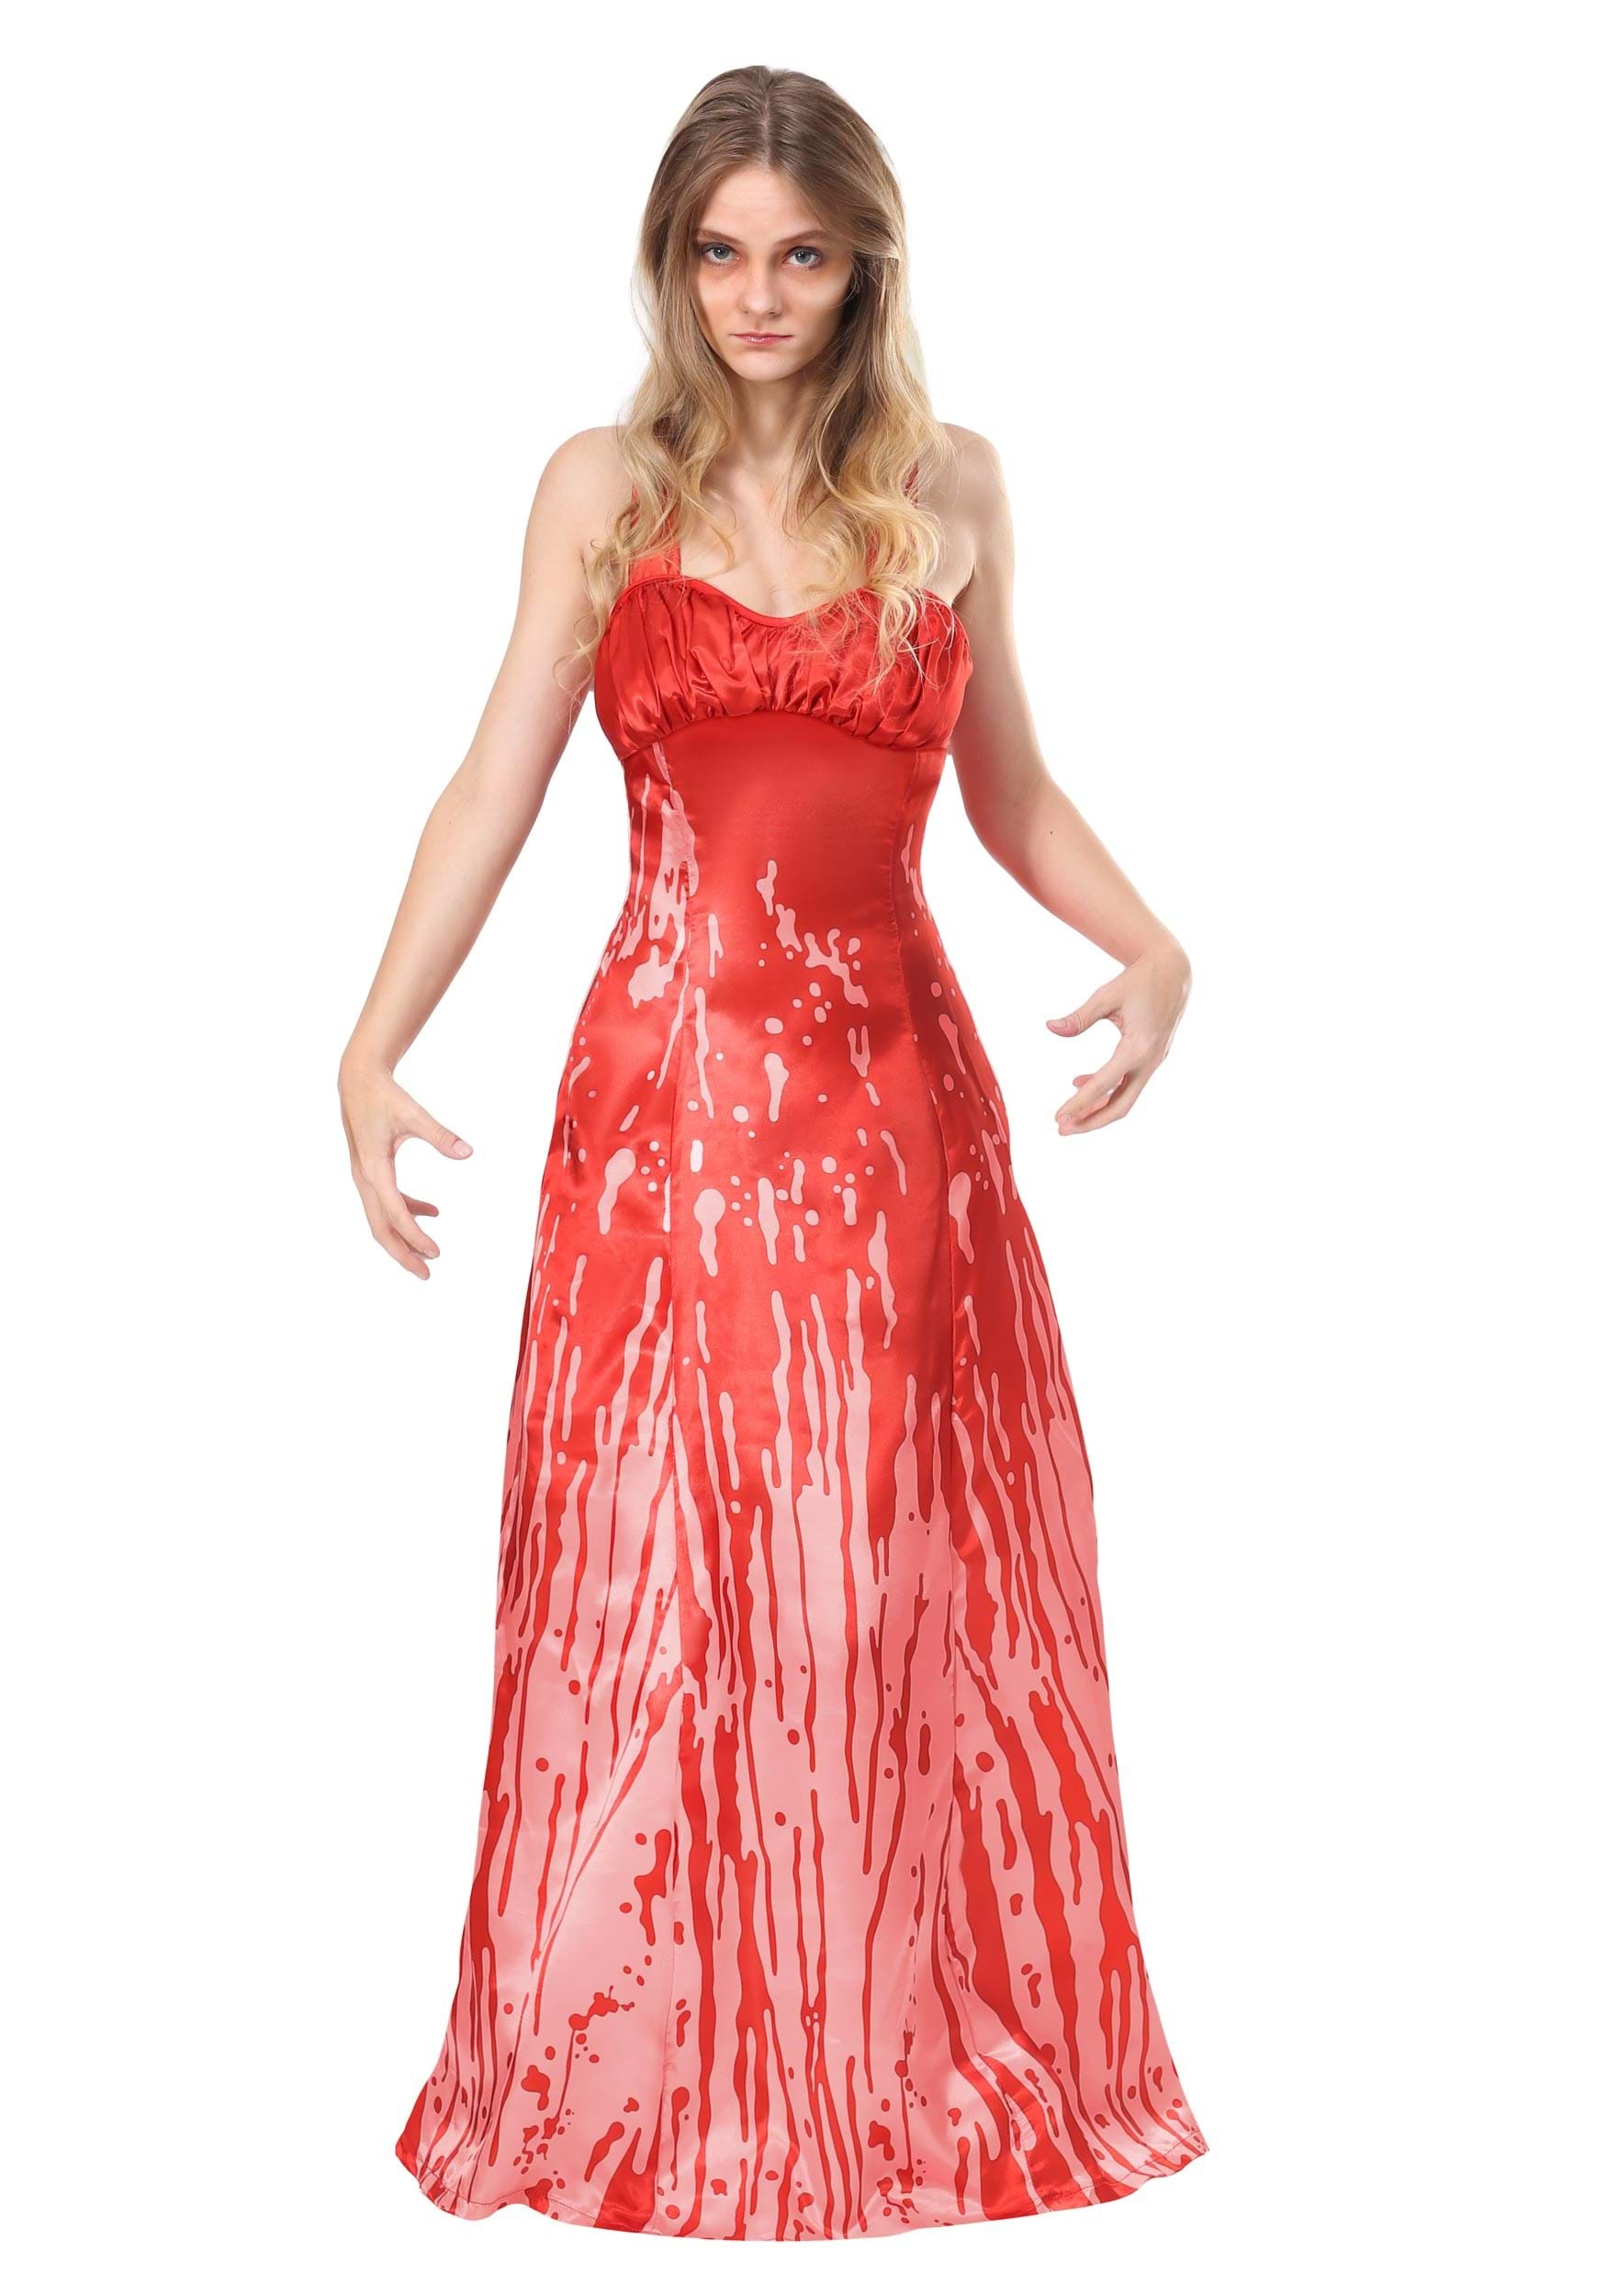 Womens Adult Carrie Costume